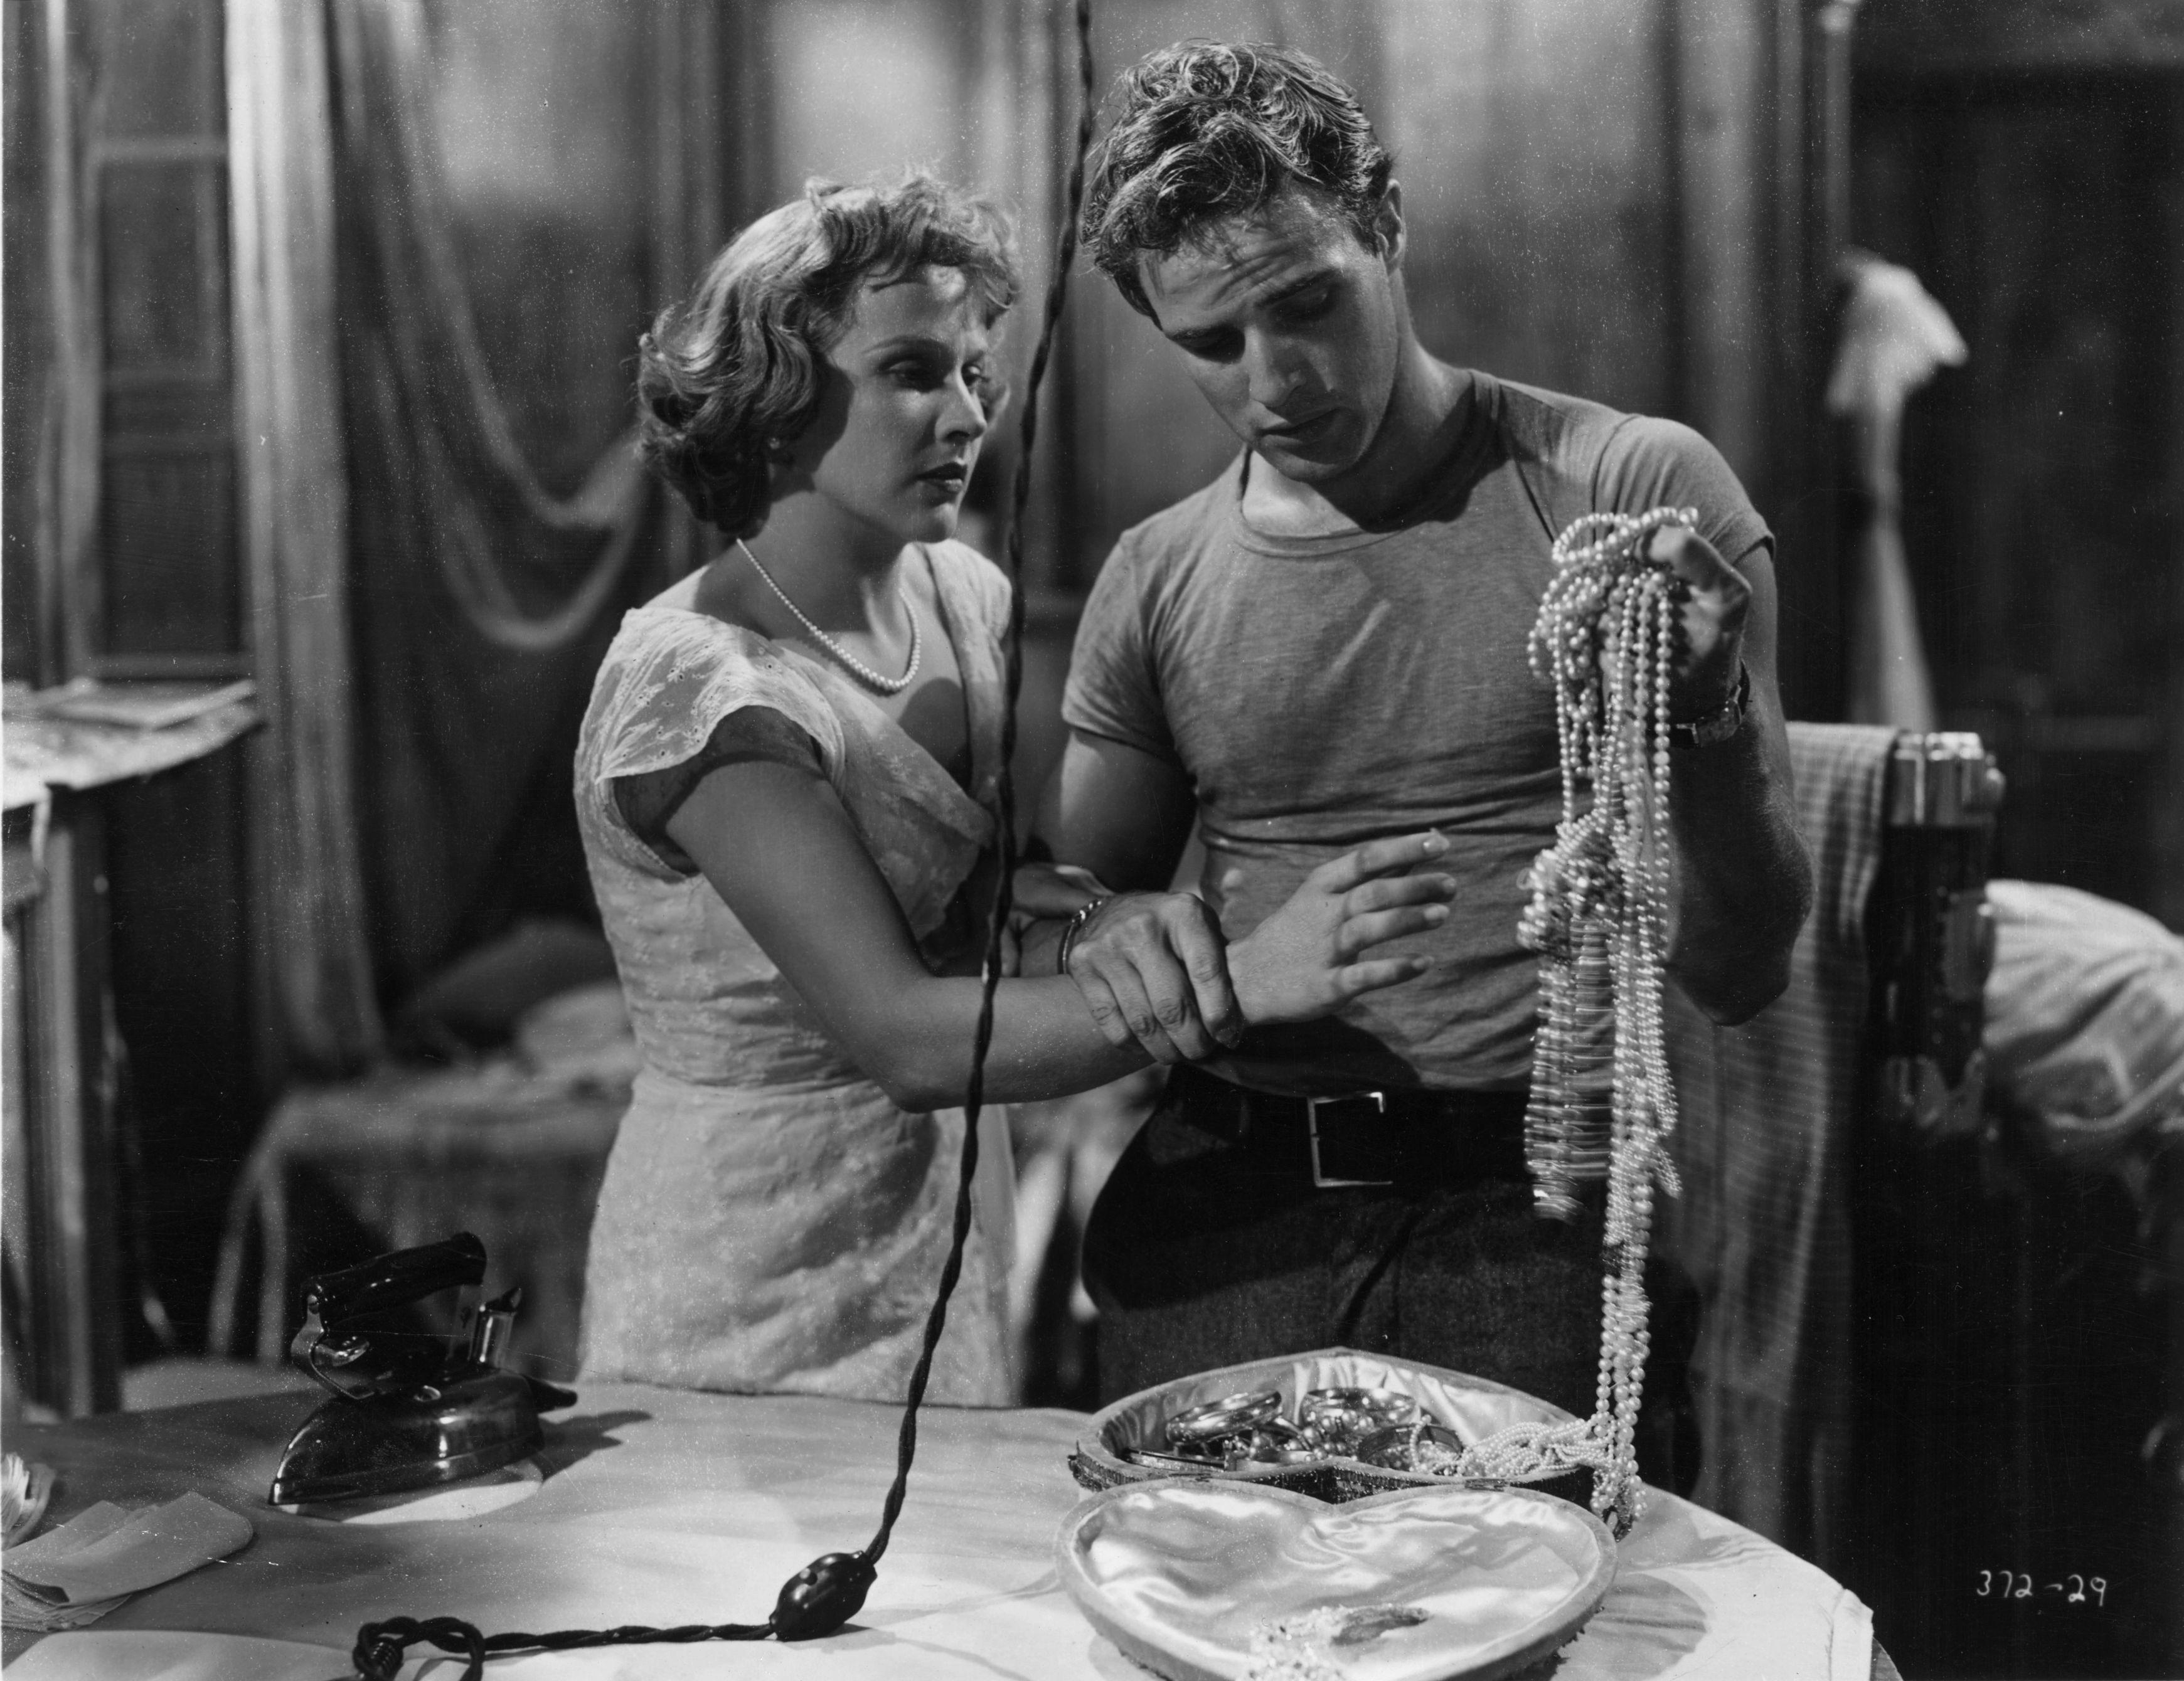 1951: Marlon Brando and Kim Hunter (1922 - 2002) in a dramatic scene from 'A Street Car Named Desire' written by Tennessee Williams and directed by Elia Kazan. (Photo by Hulton Archive/Getty Images)